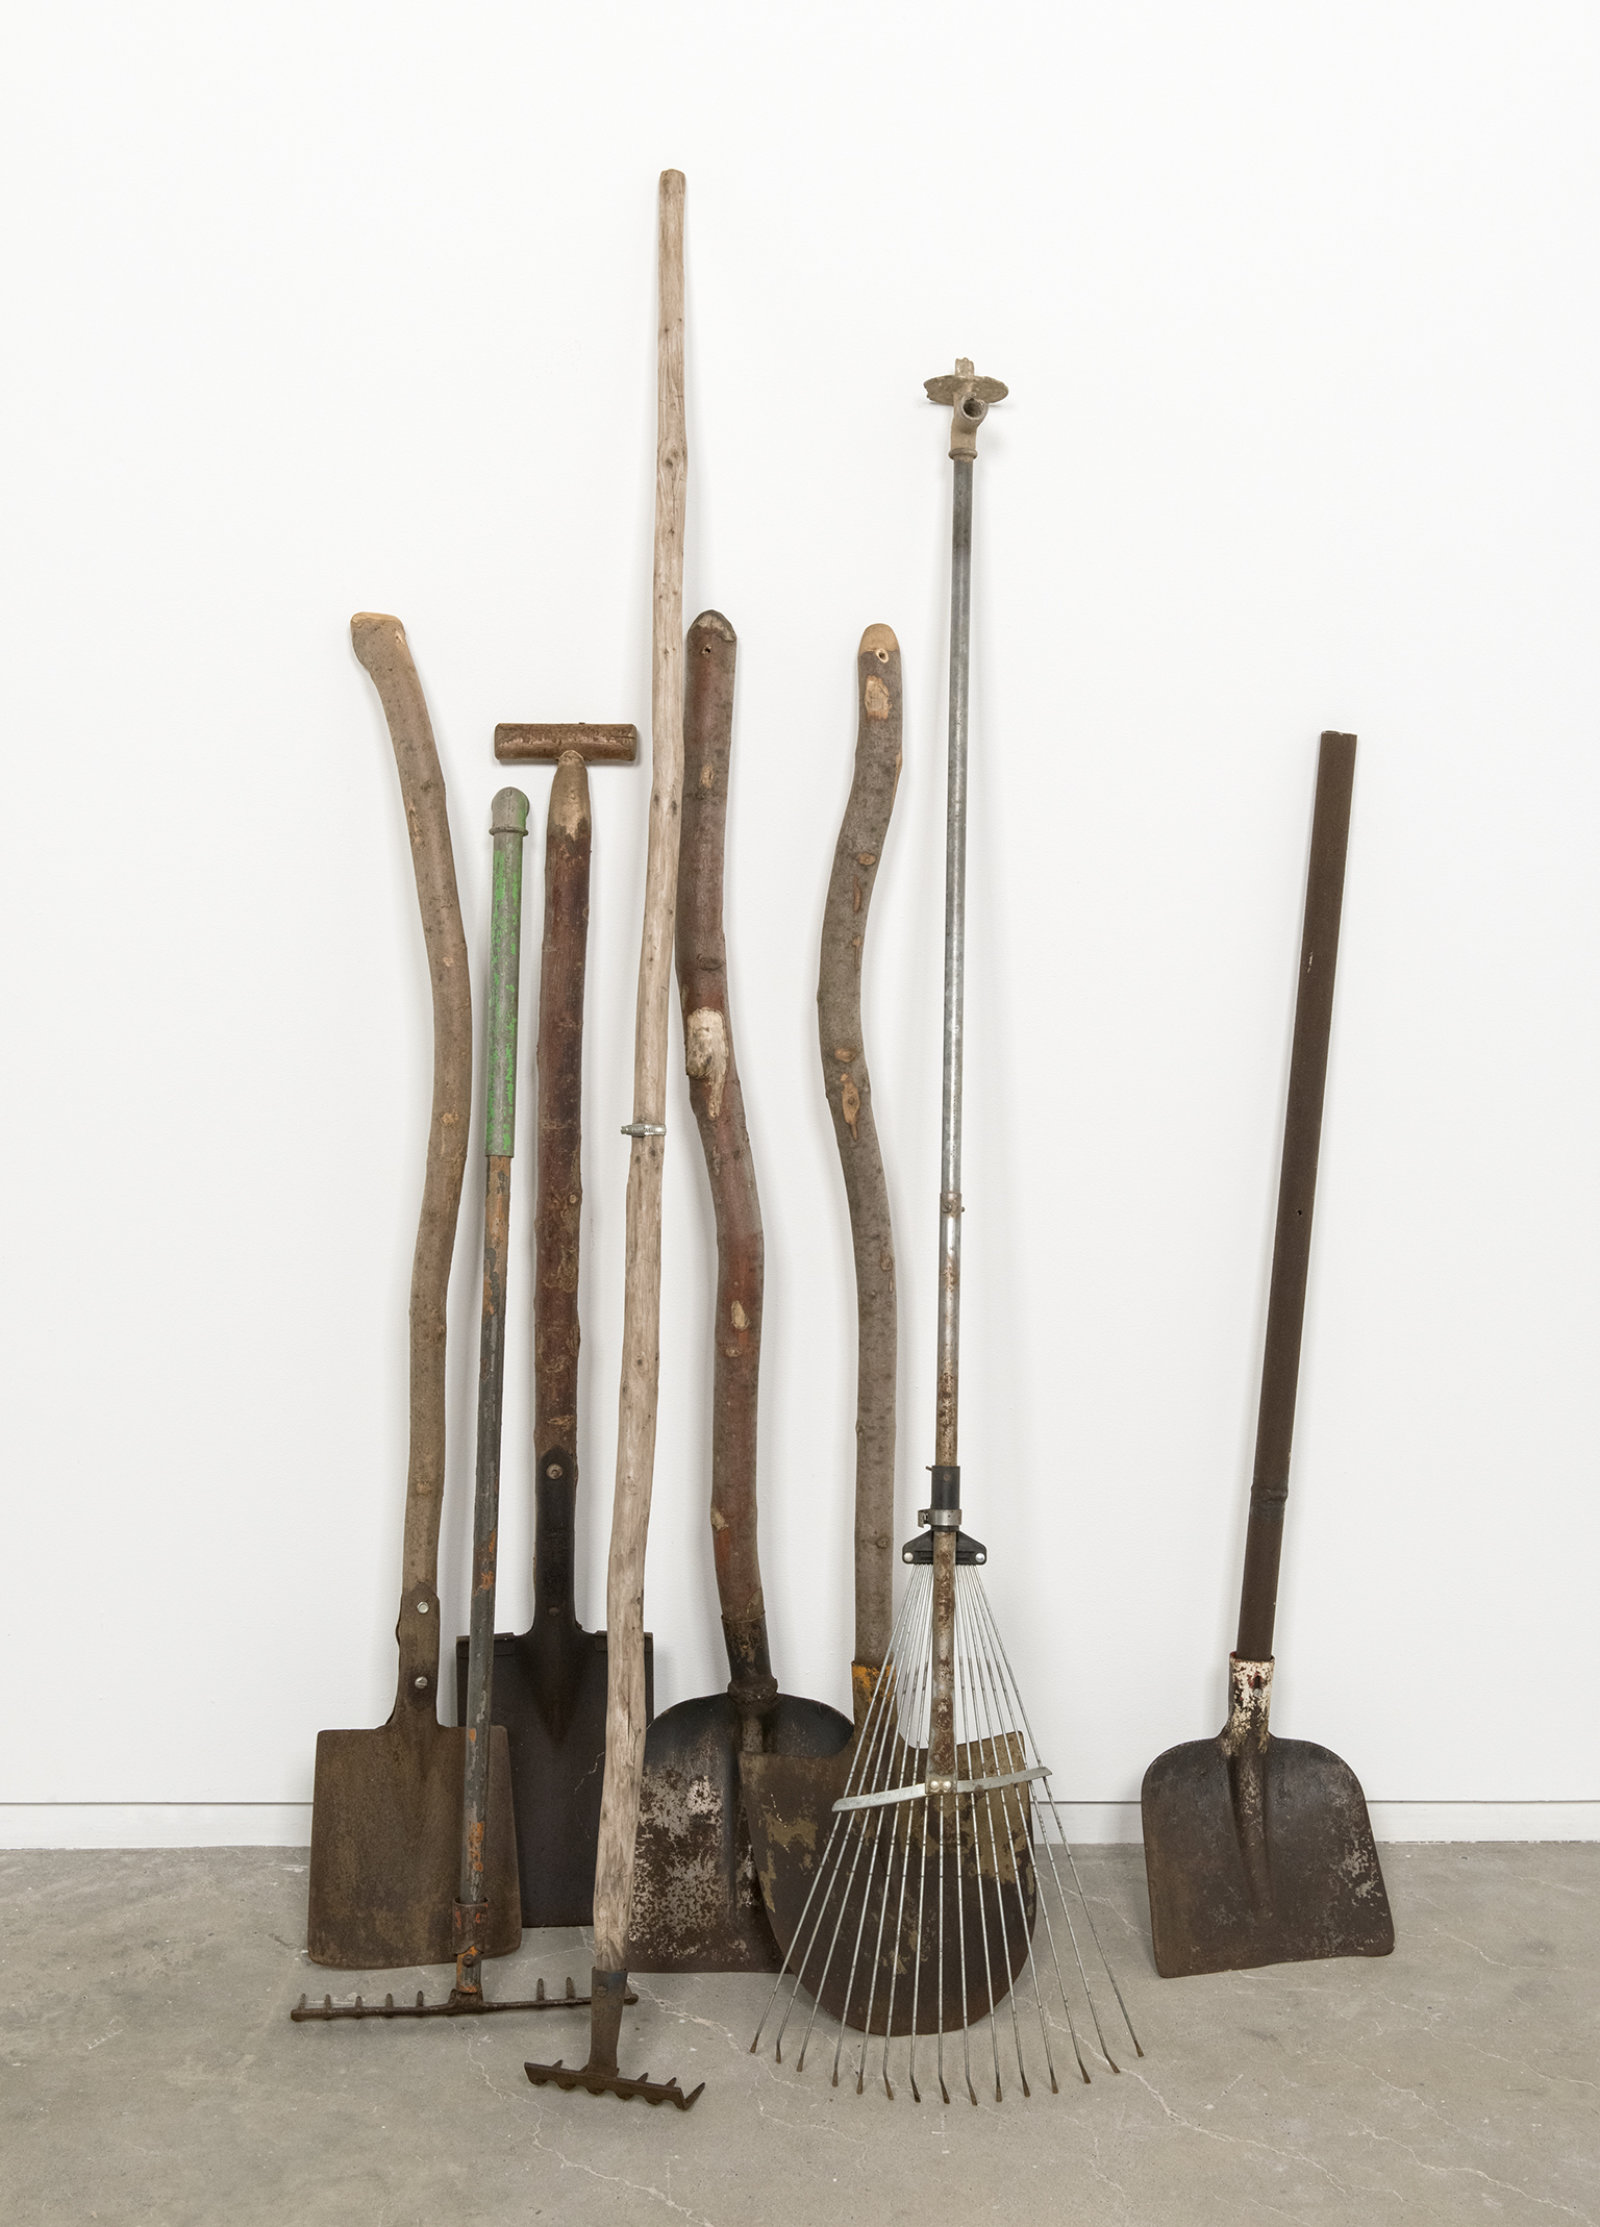 Ashes Withyman, Tools from a place, near the buried canal, 2011–2012, metal, wood, 65 x 49 x 18 in. (164 x 124 x 46 cm)